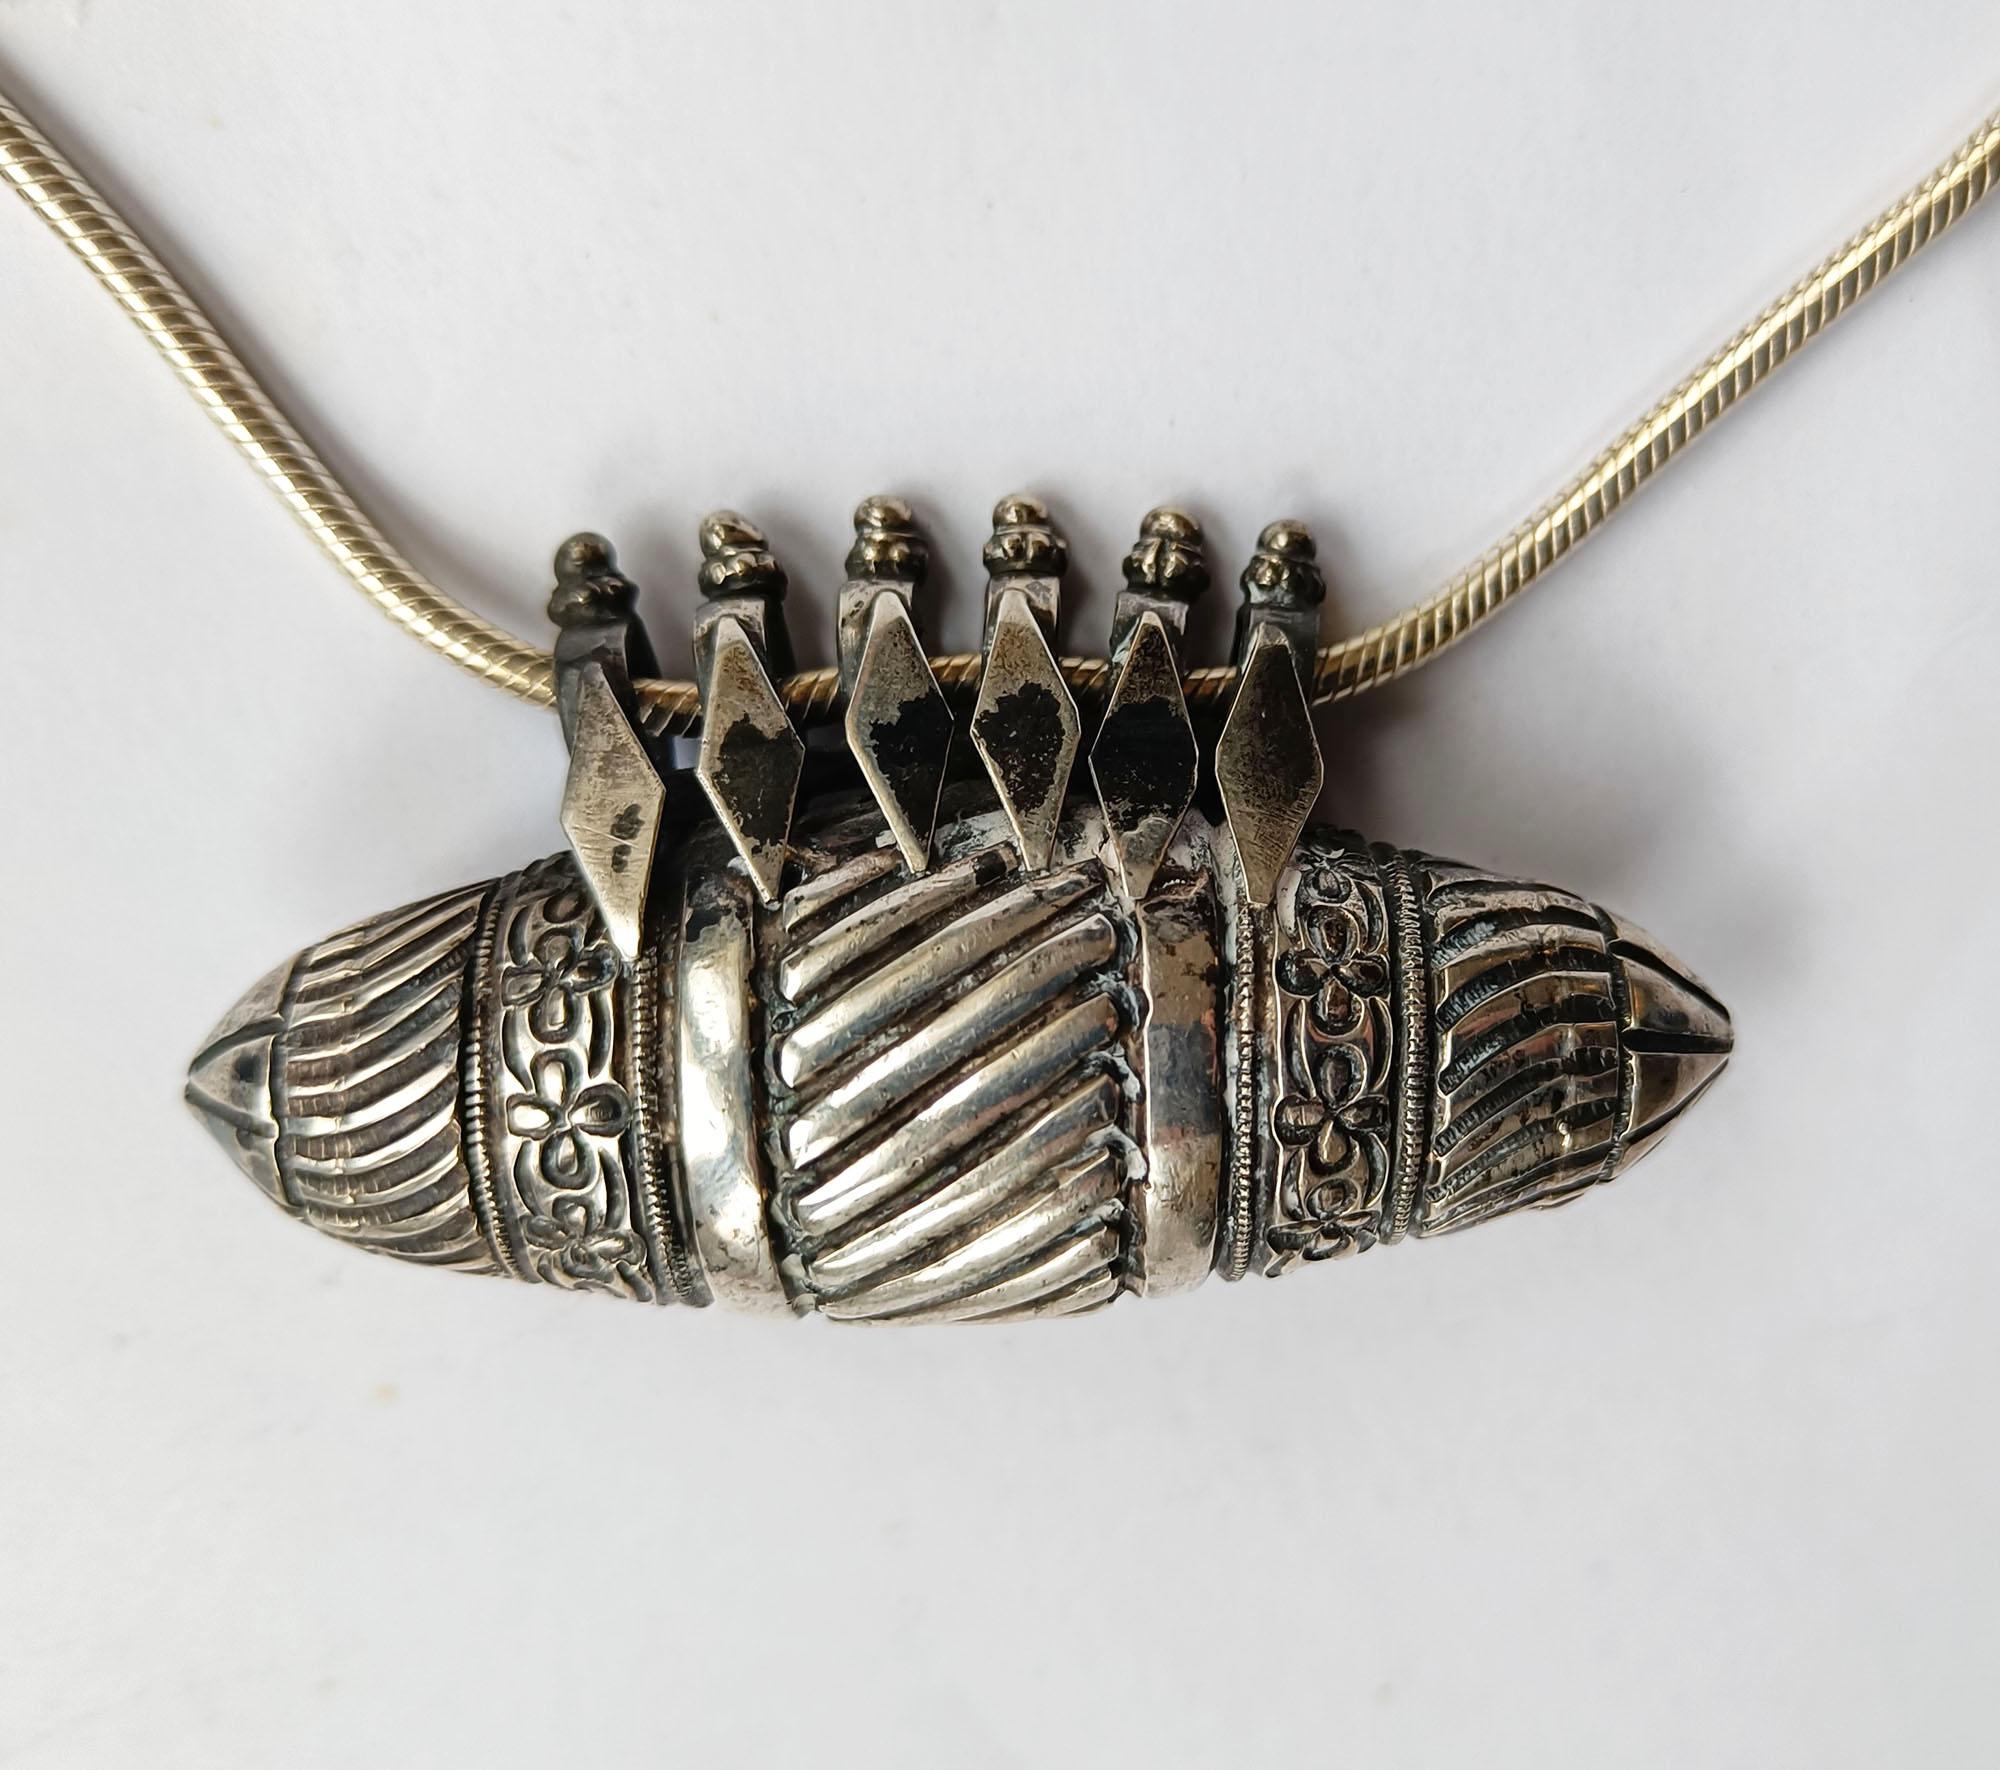  
Indian Hindu Silver Amulet necklace 
Heavy bullet shaped Amulet  necklace with pointed ends with floral and geometric design
High grade silver  
Pendant Length 9  cm  weight 90 grams
Period mid 20th century
Condition: Fine.